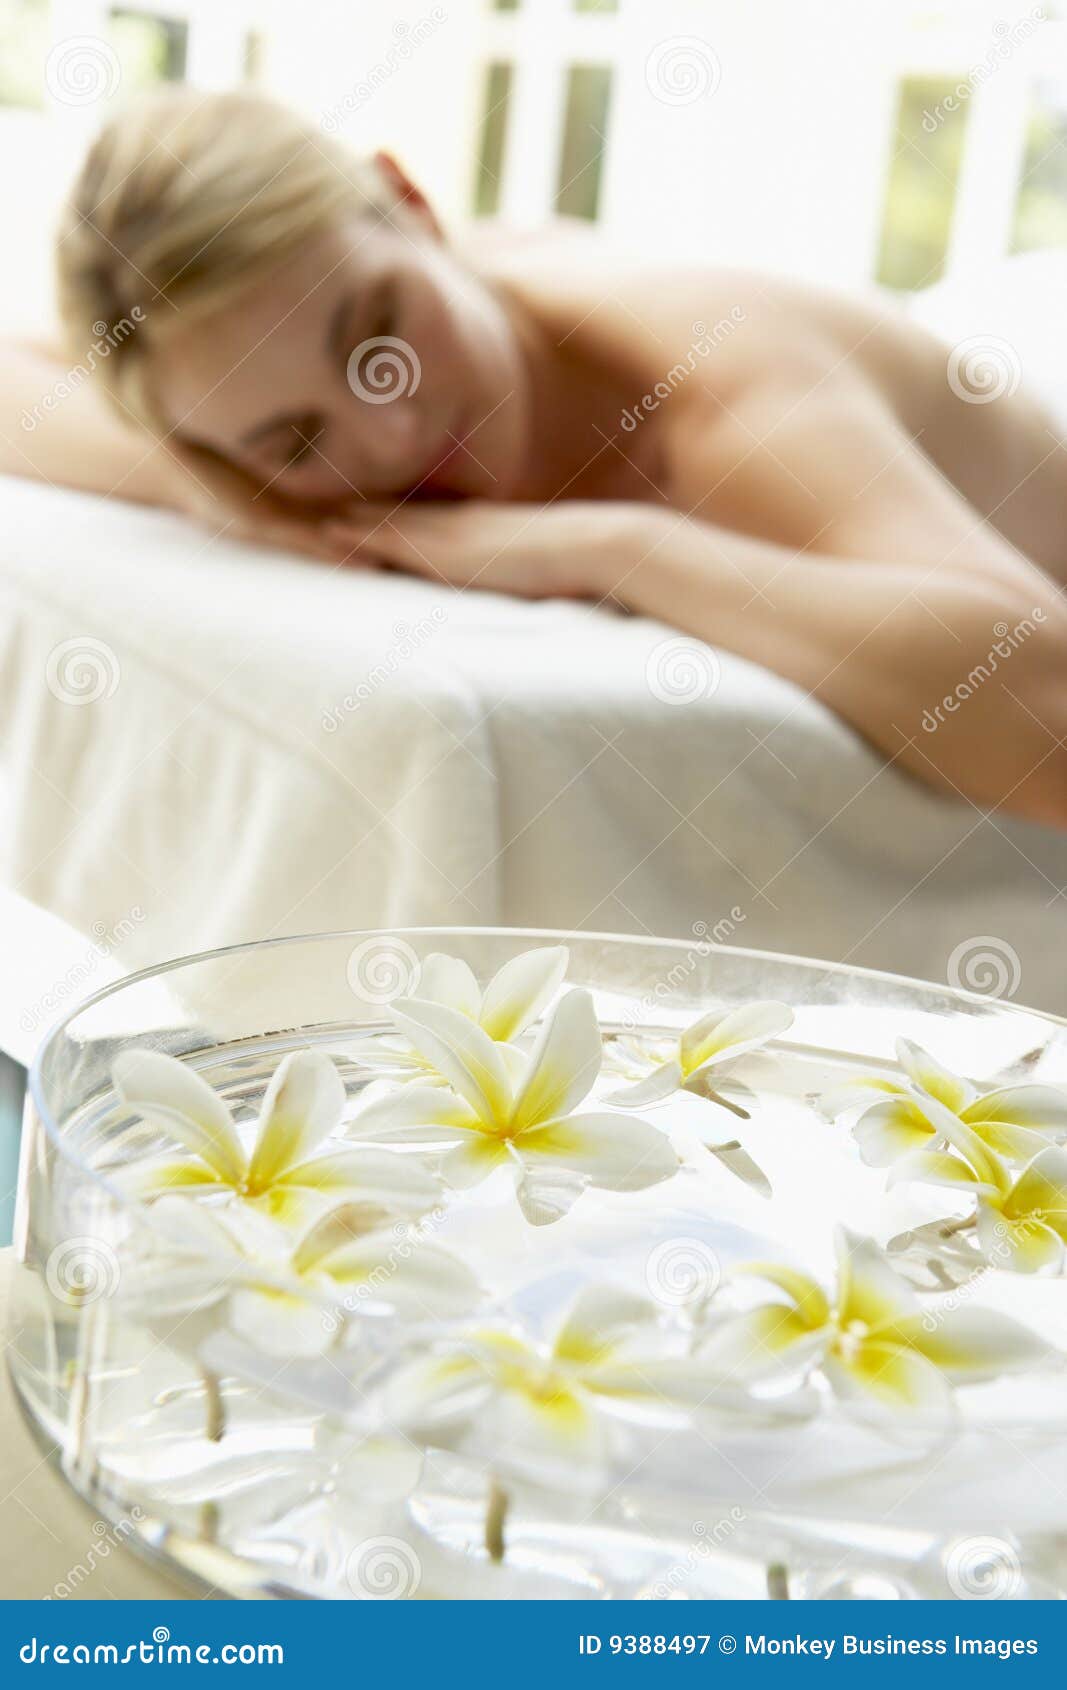 woman on massage table with flowers in foreground